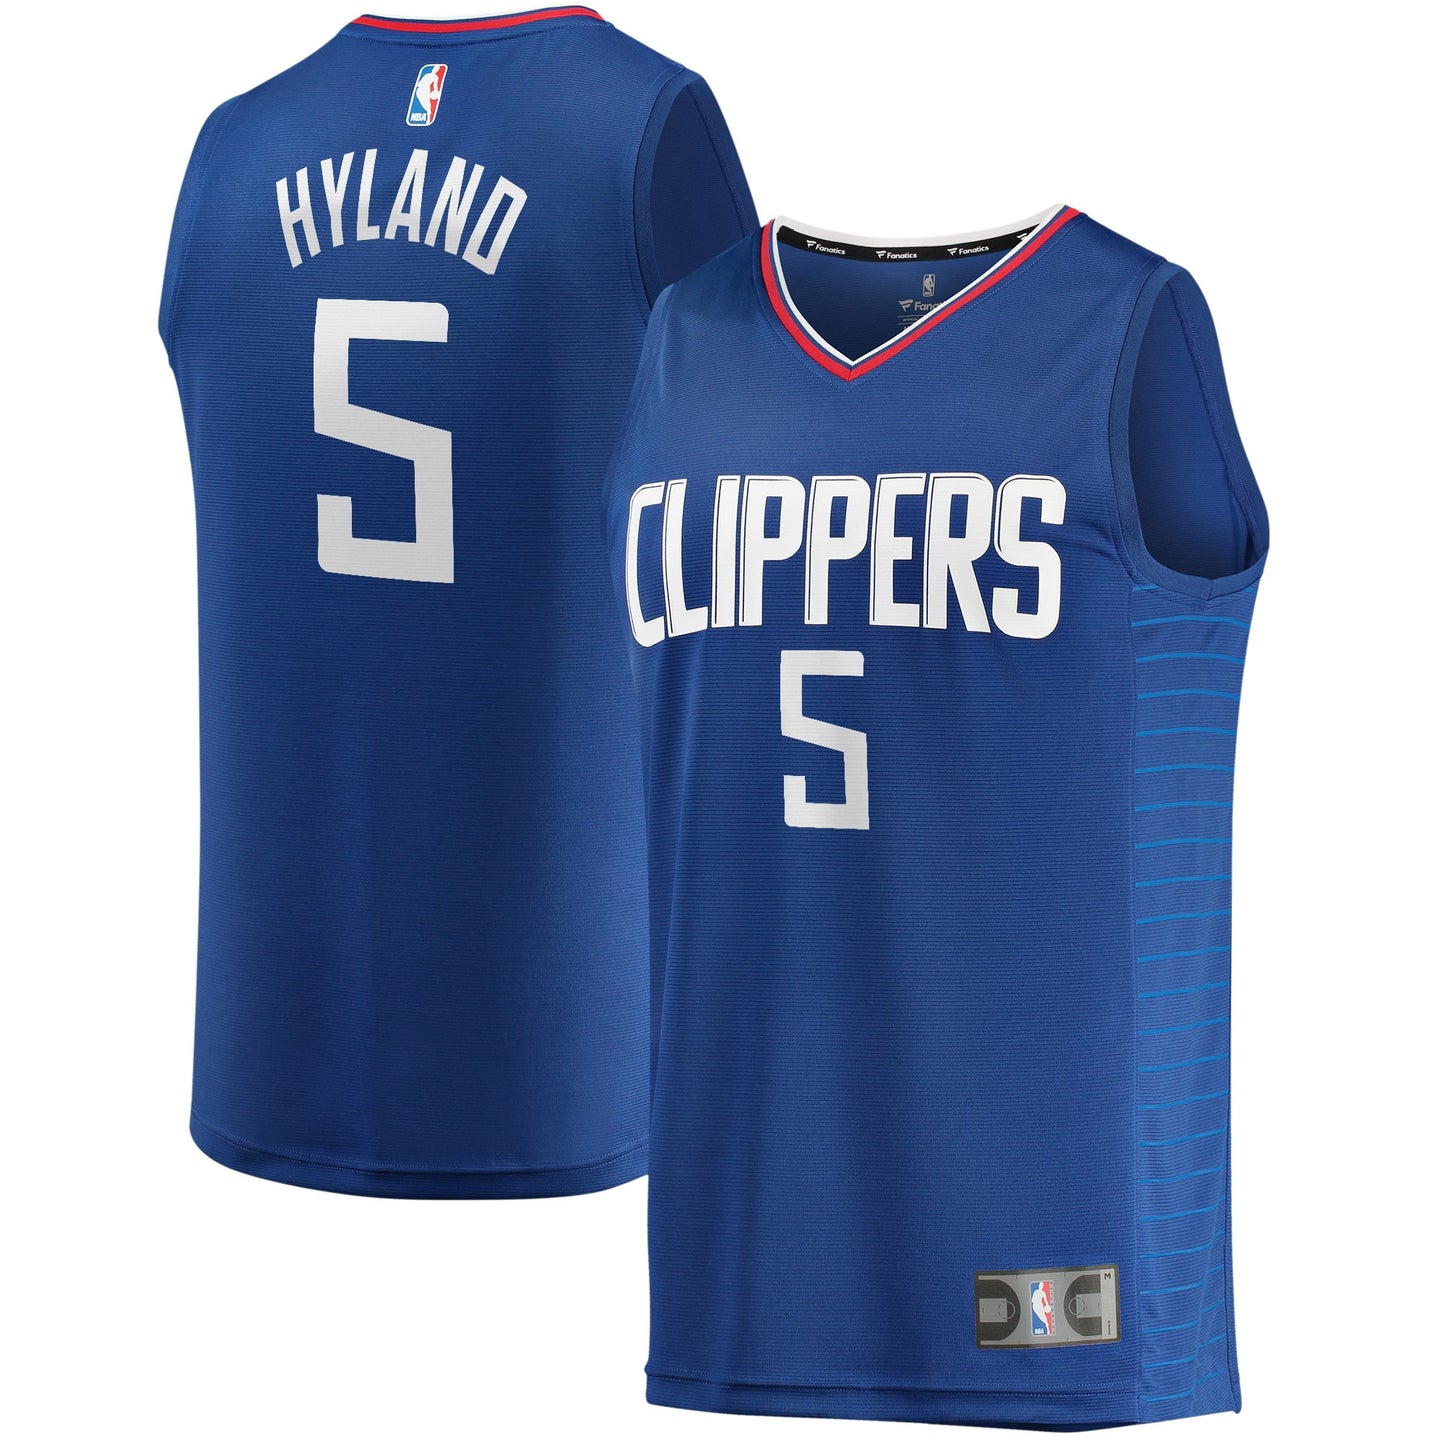 Bones Hyland LA Clippers Fanatics Branded Youth Fast Break Player Jersey - Icon Edition - Royal